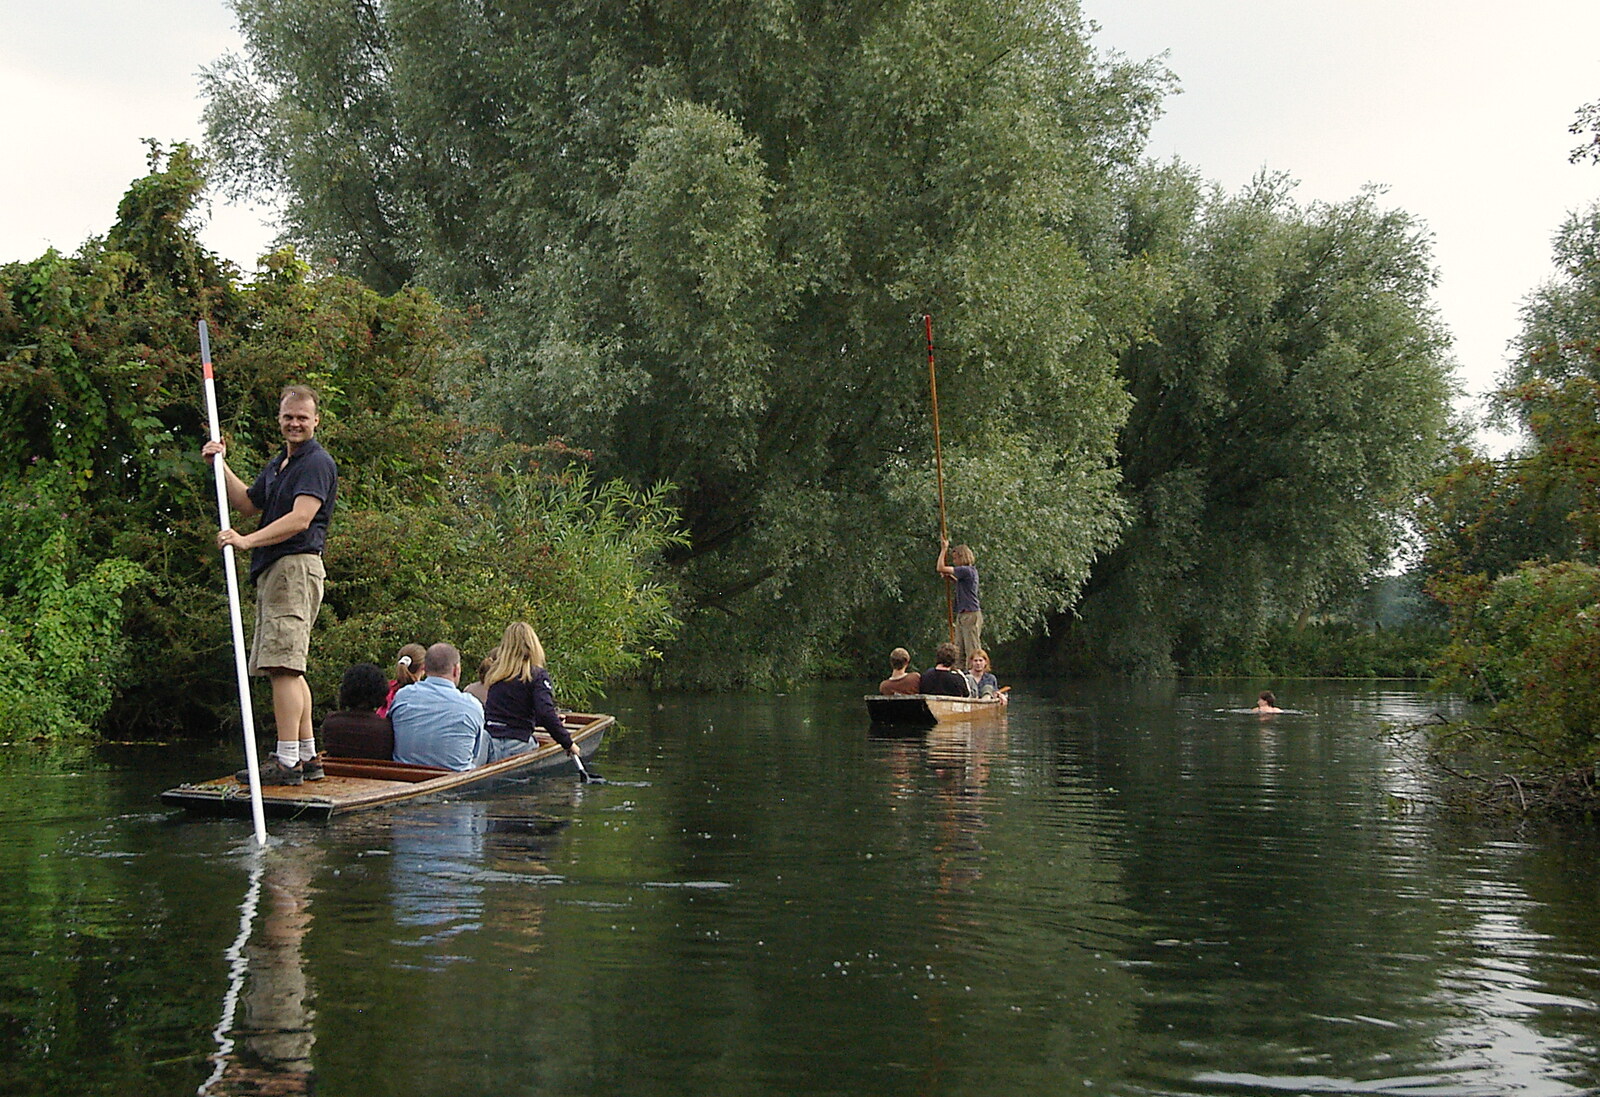 An almost Constable-esque scene from Qualcomm goes Punting on the Cam, Grantchester Meadows, Cambridge - 18th August 2005